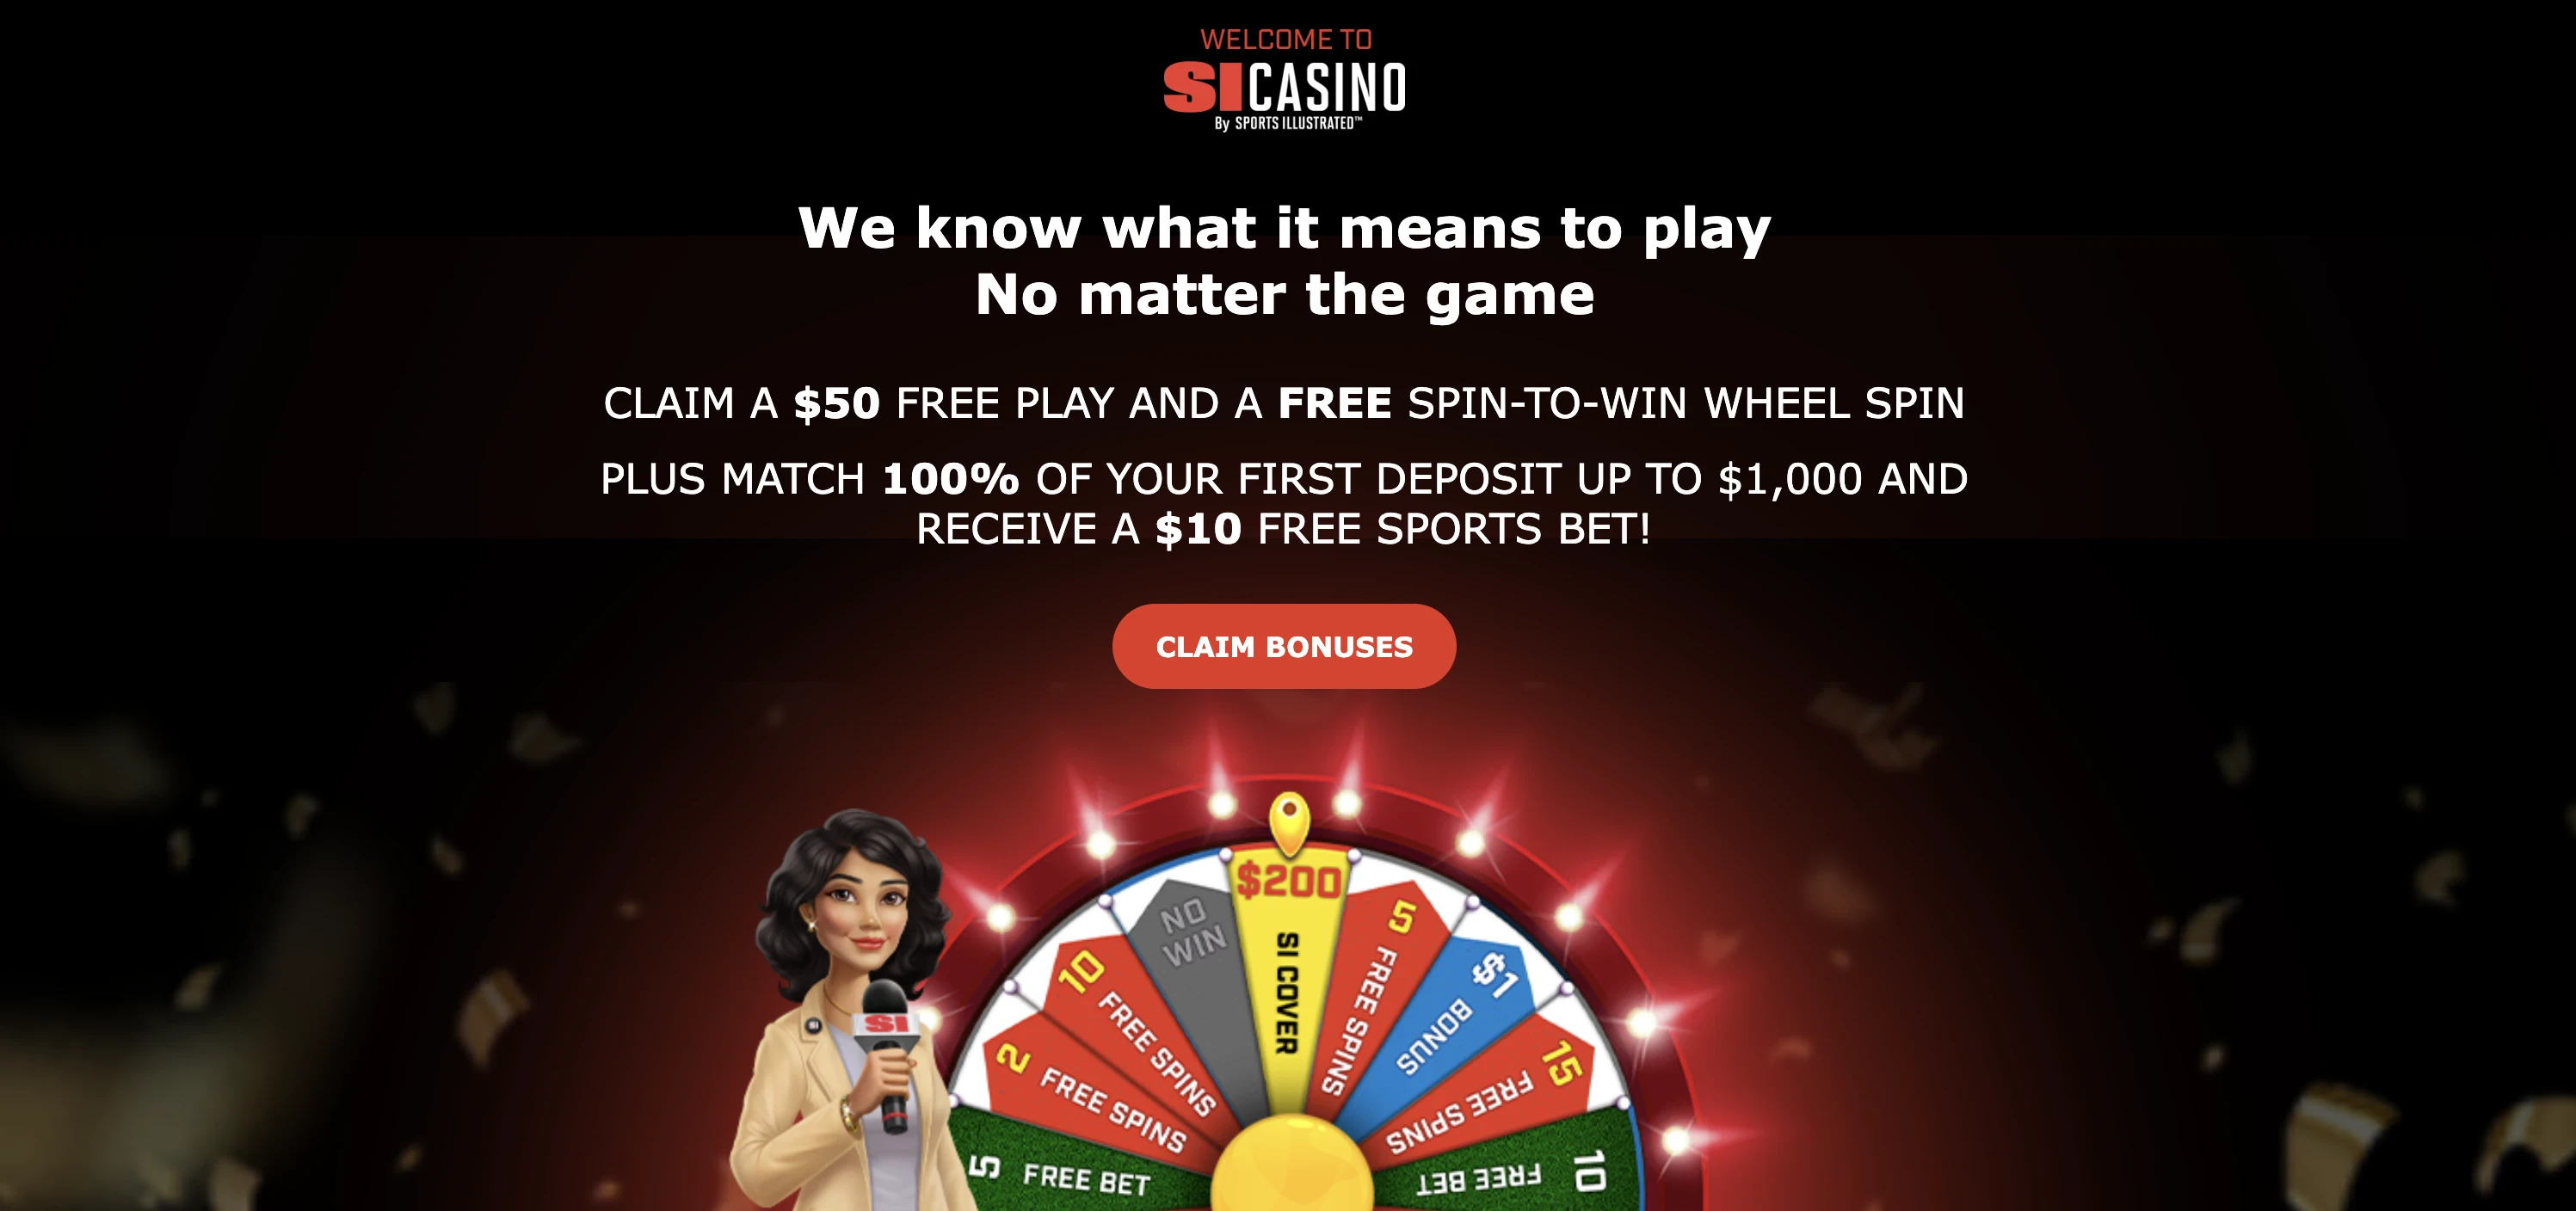 SI Casino No Deposit Bonus - Free Play & FREE Spin-to-Win Wheel Spin + 100% First Deposit Match Up To 00 and Receive $ 10 FREE Sports Bet